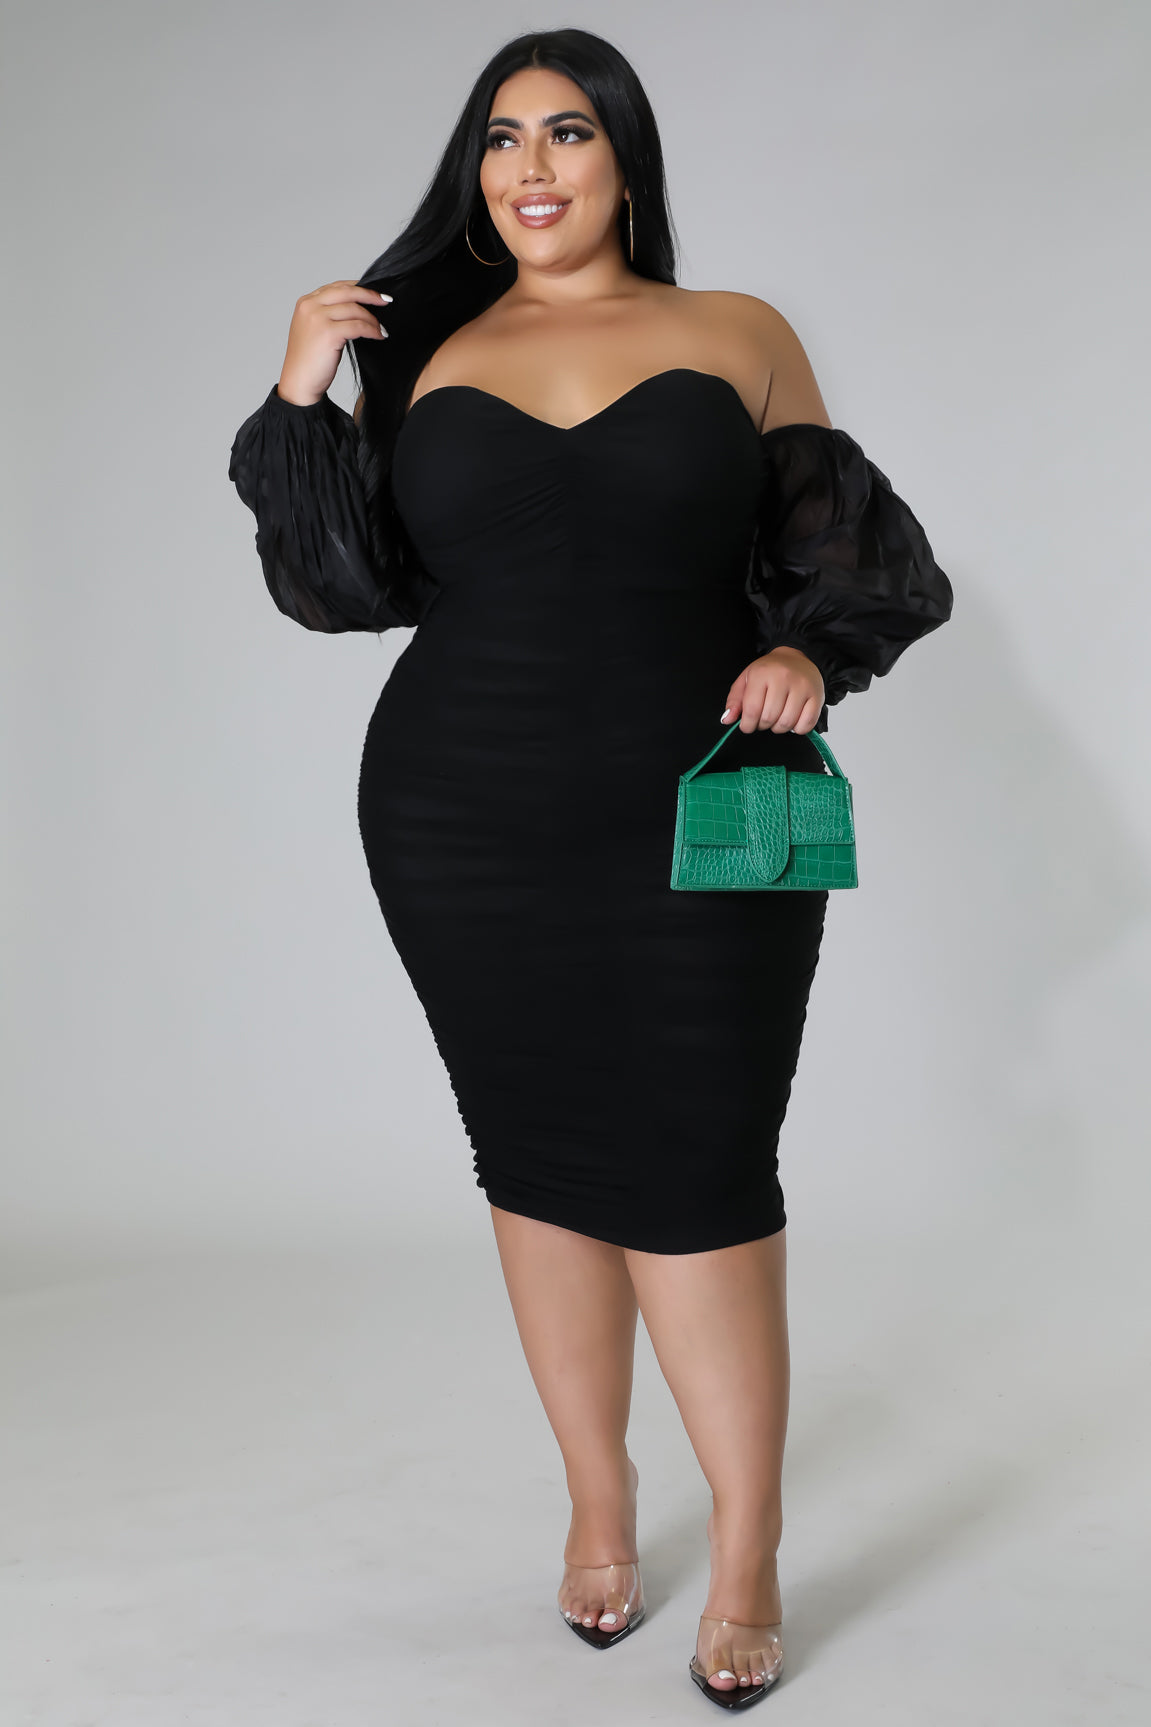 yoyo-reign-plus-size-clothing-Star-Of-The-Room-Black-Sheer-Sleeved-Dress